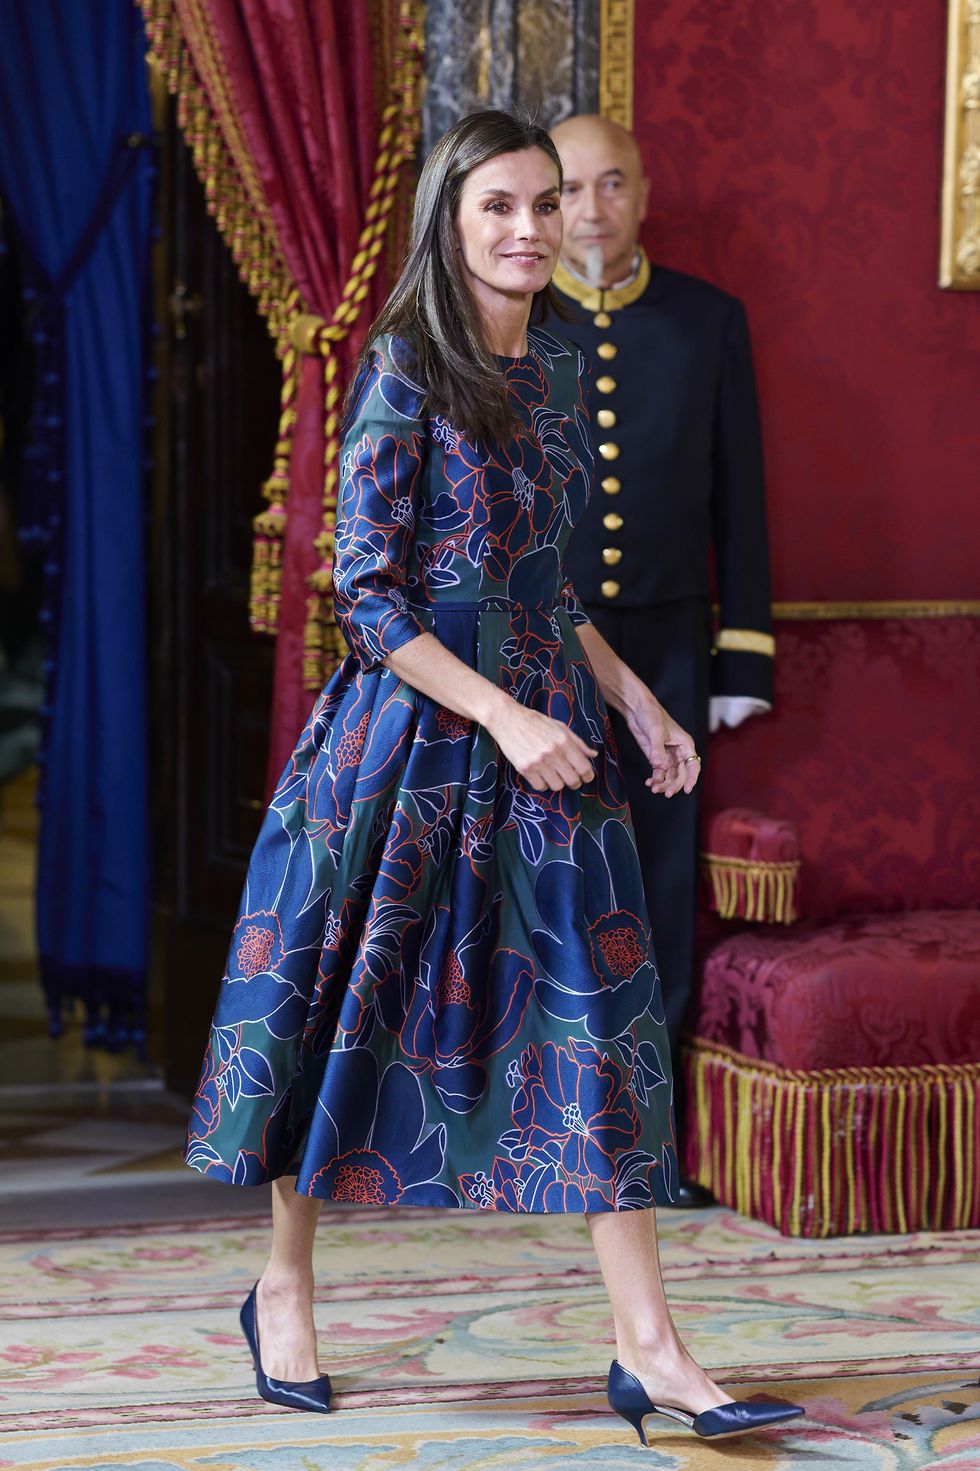 spanish royals host a lunch for the president of guatemala and his wife